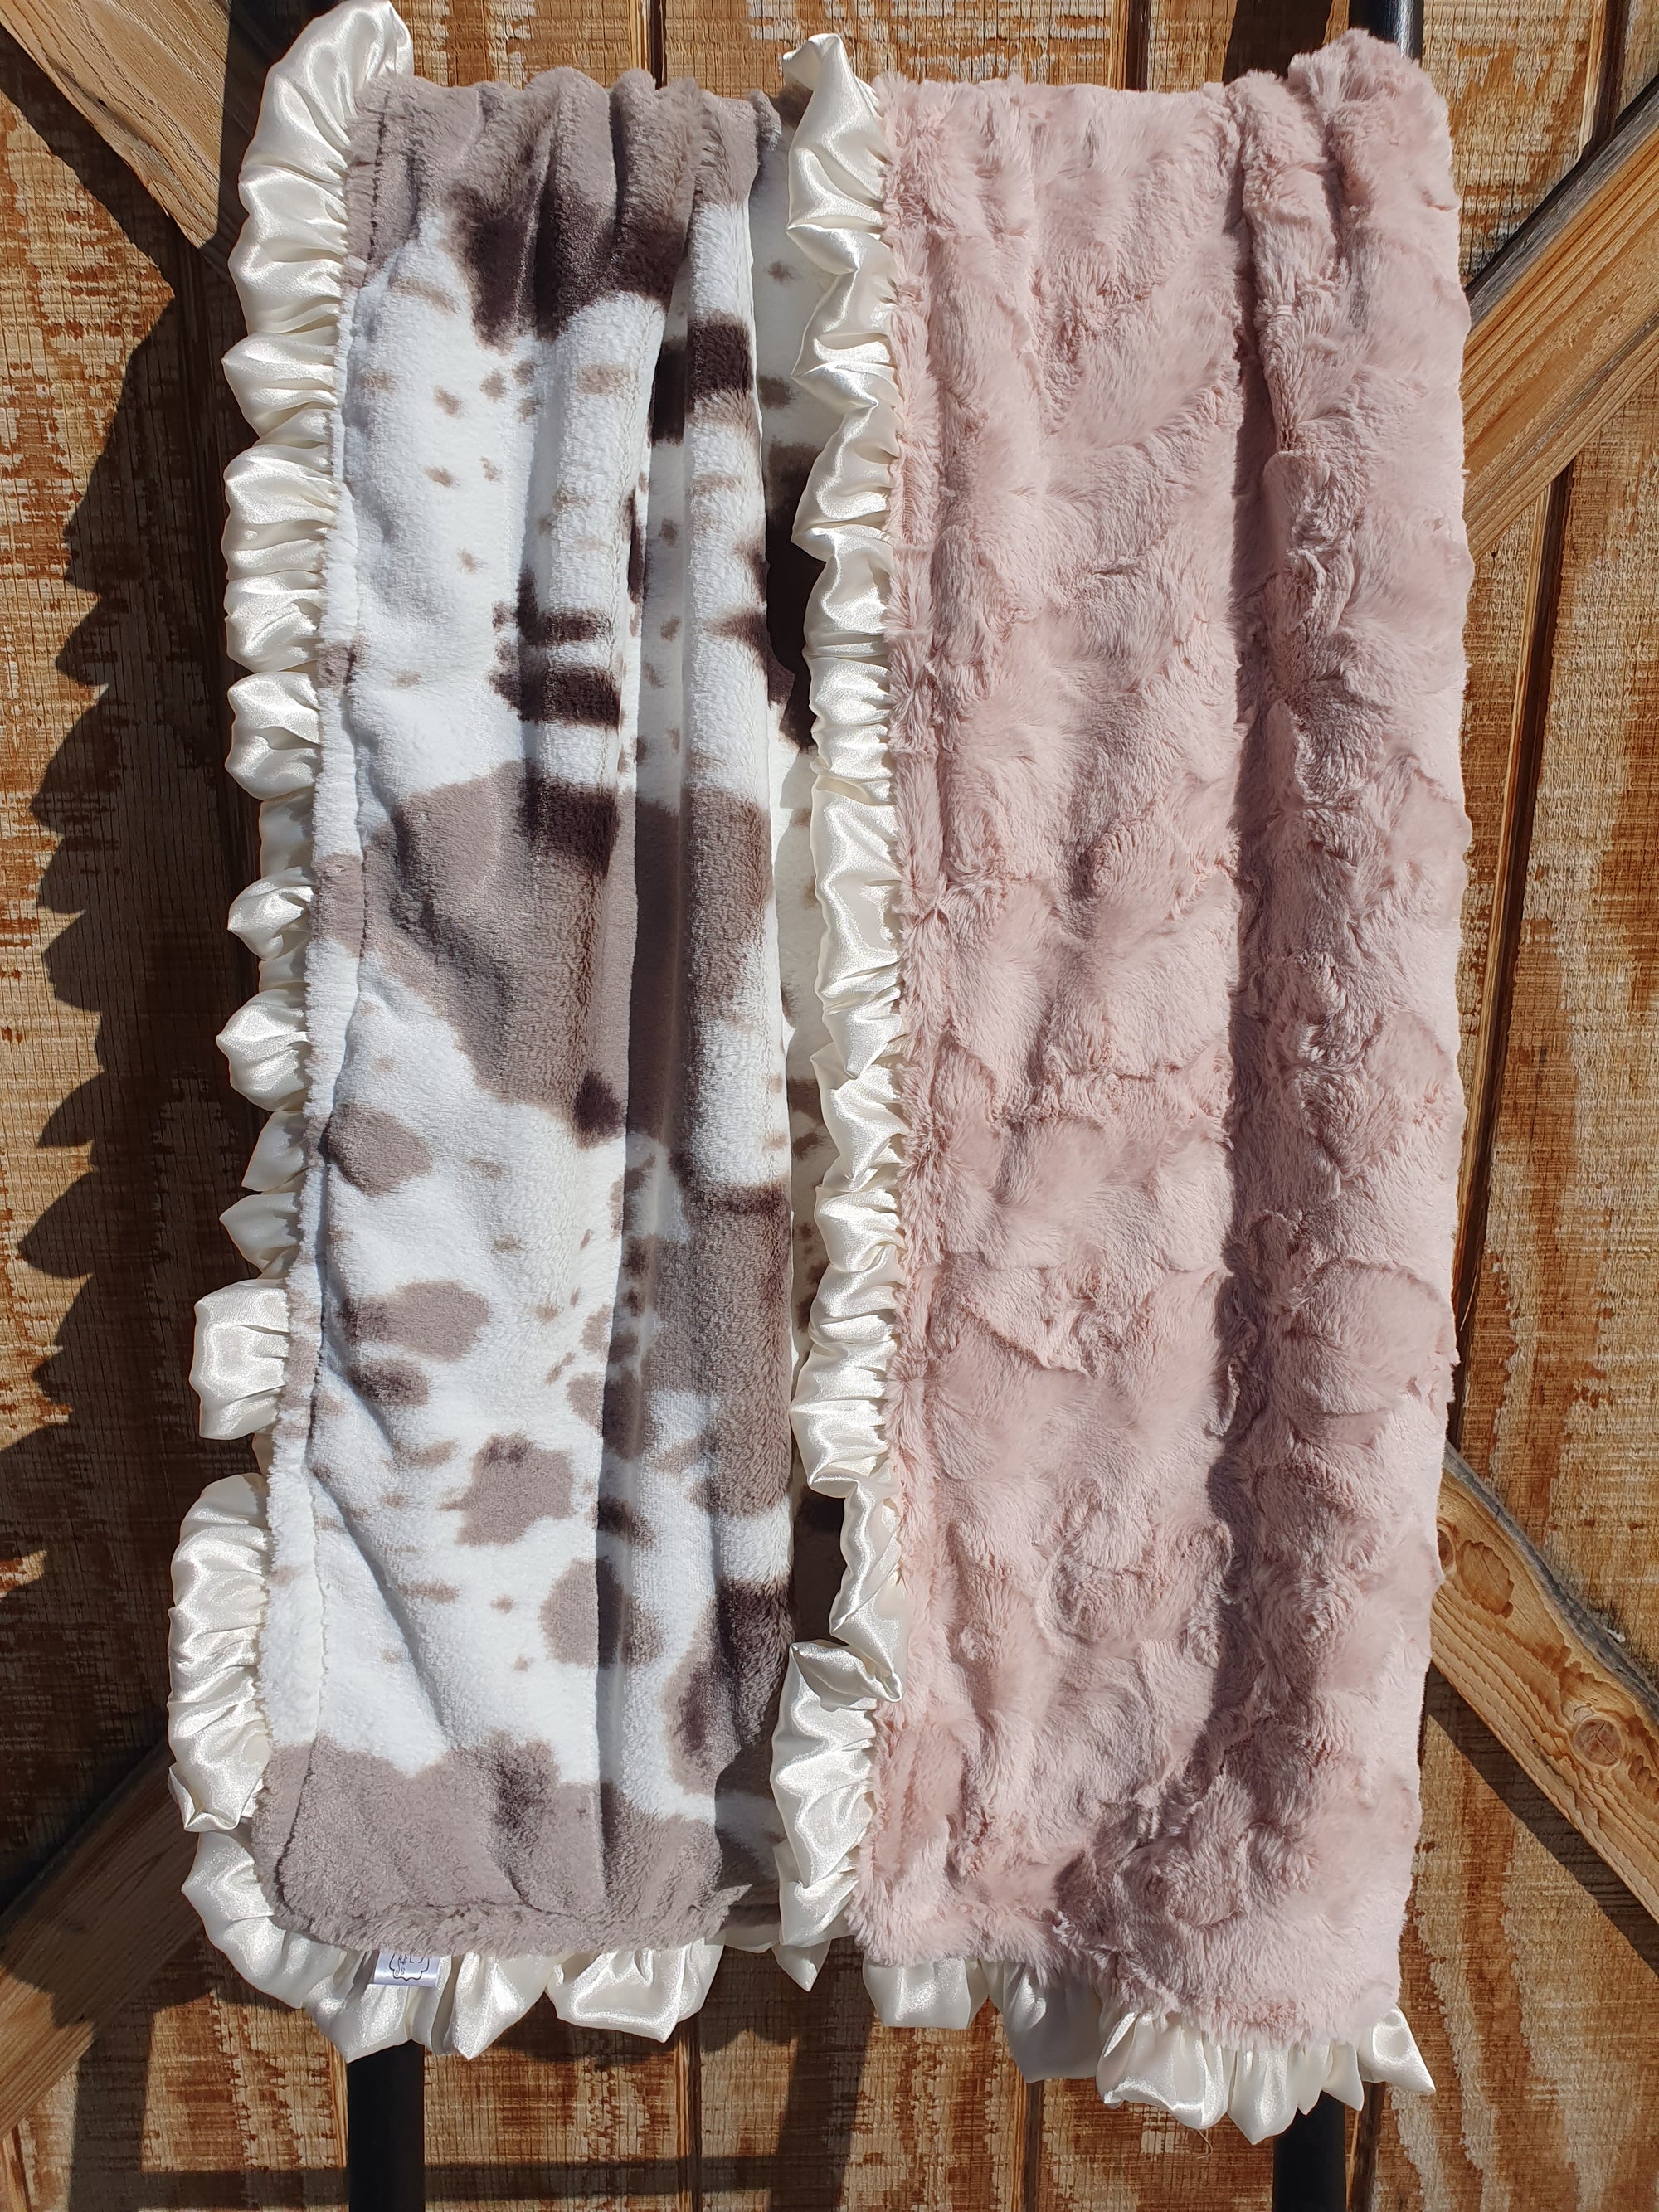 Ruffle Baby Blanket - Brown Sugar Cow Minky and Dusty Rose Minky - DBC Baby Bedding Co 